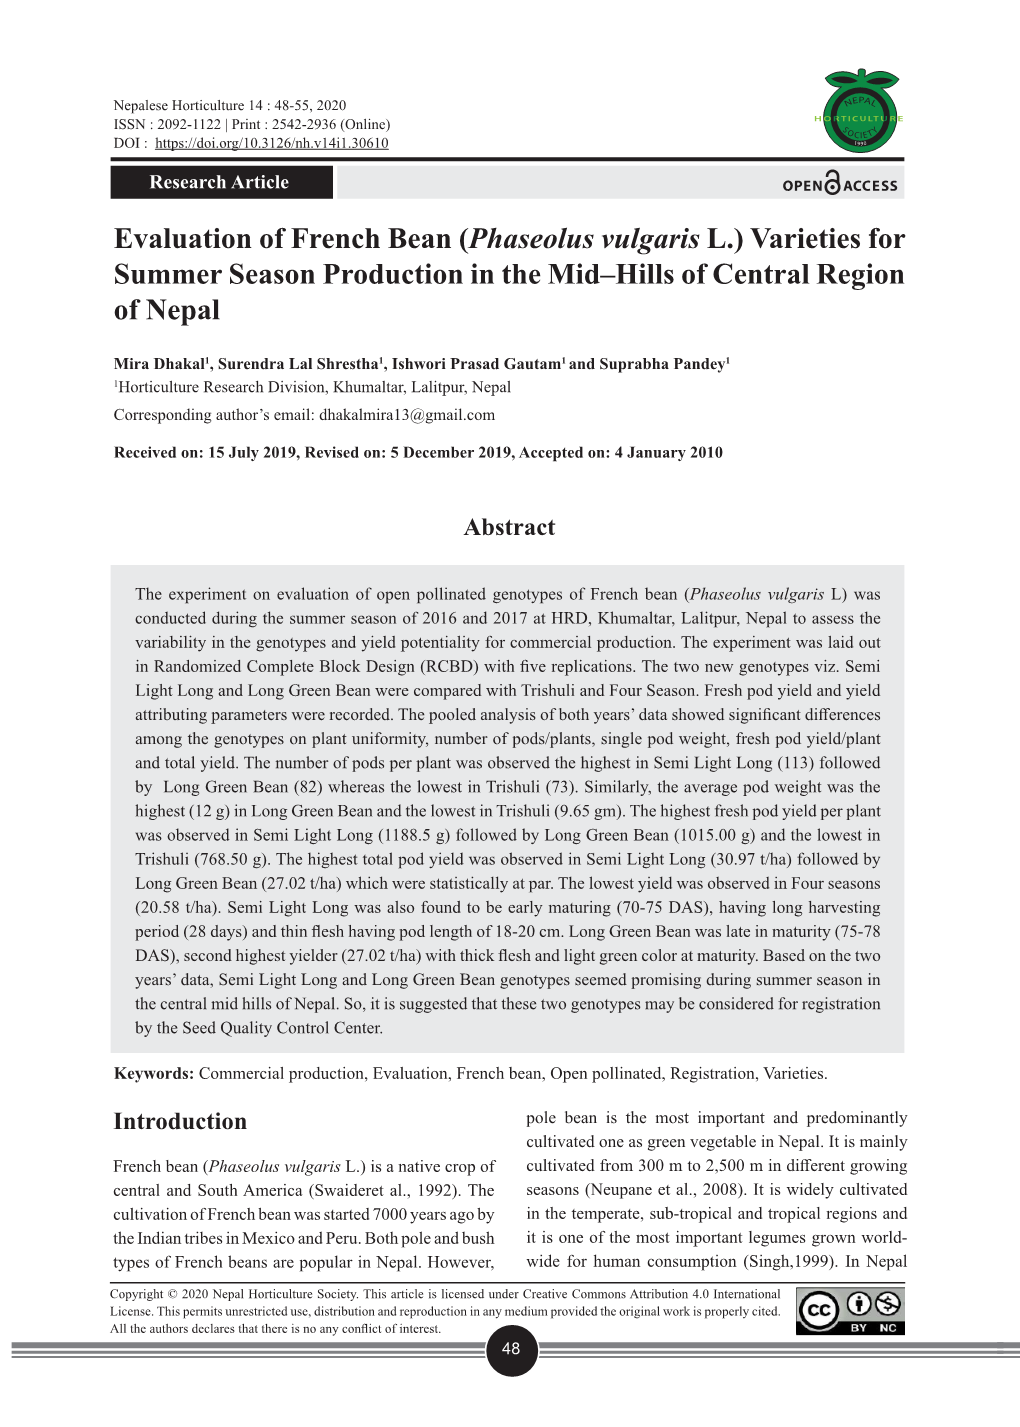 Evaluation of French Bean (Phaseolus Vulgaris L.) Varieties for Summer Season Production in the Mid–Hills of Central Region of Nepal